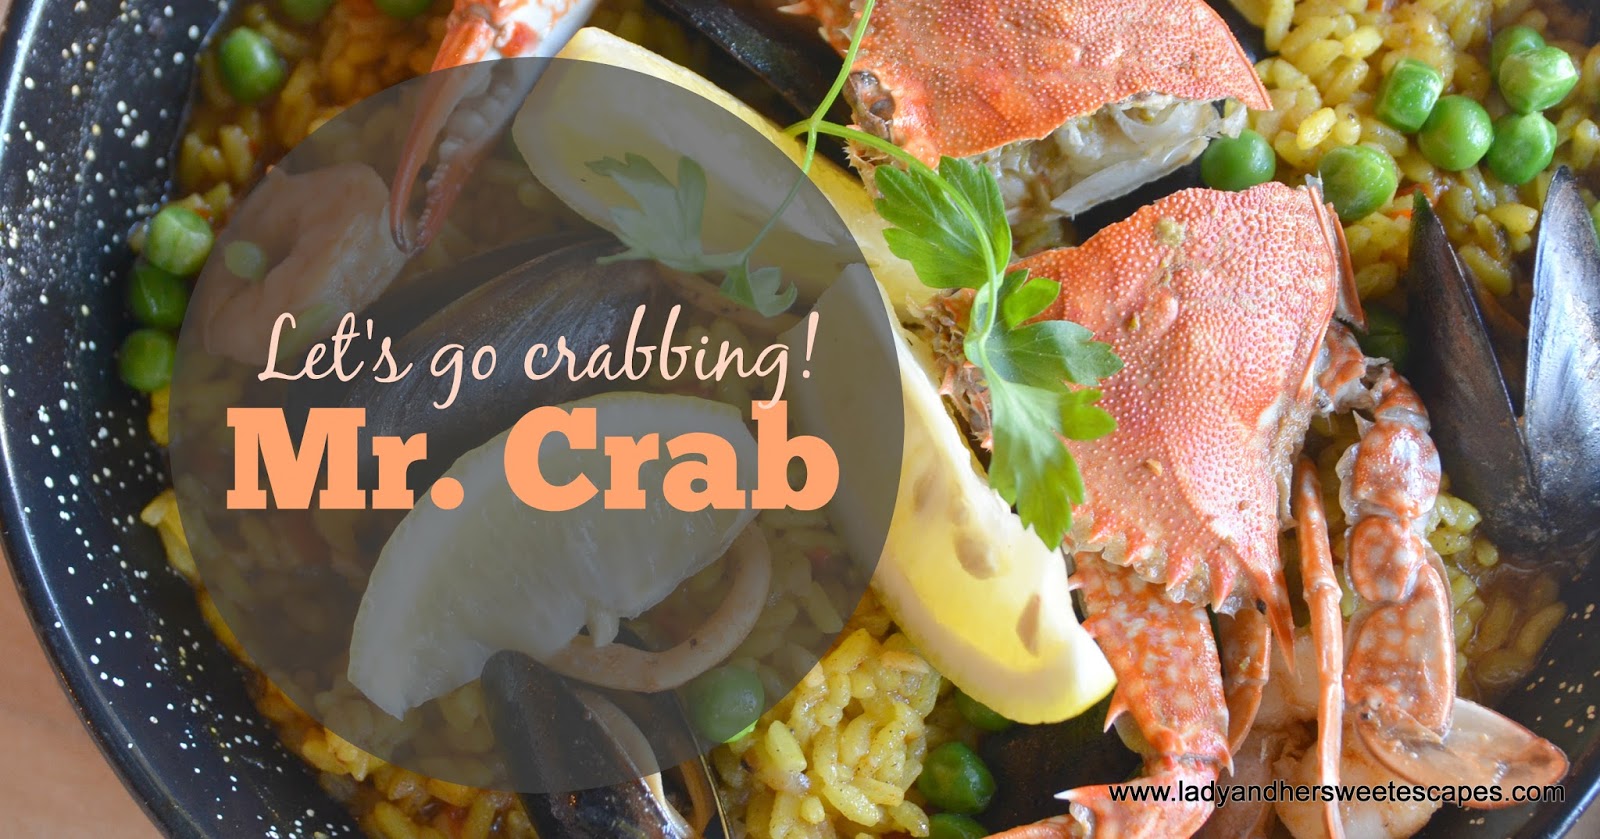 Mr. Crab Seafood Restaurant in Dubai | Lady & her Sweet Escapes